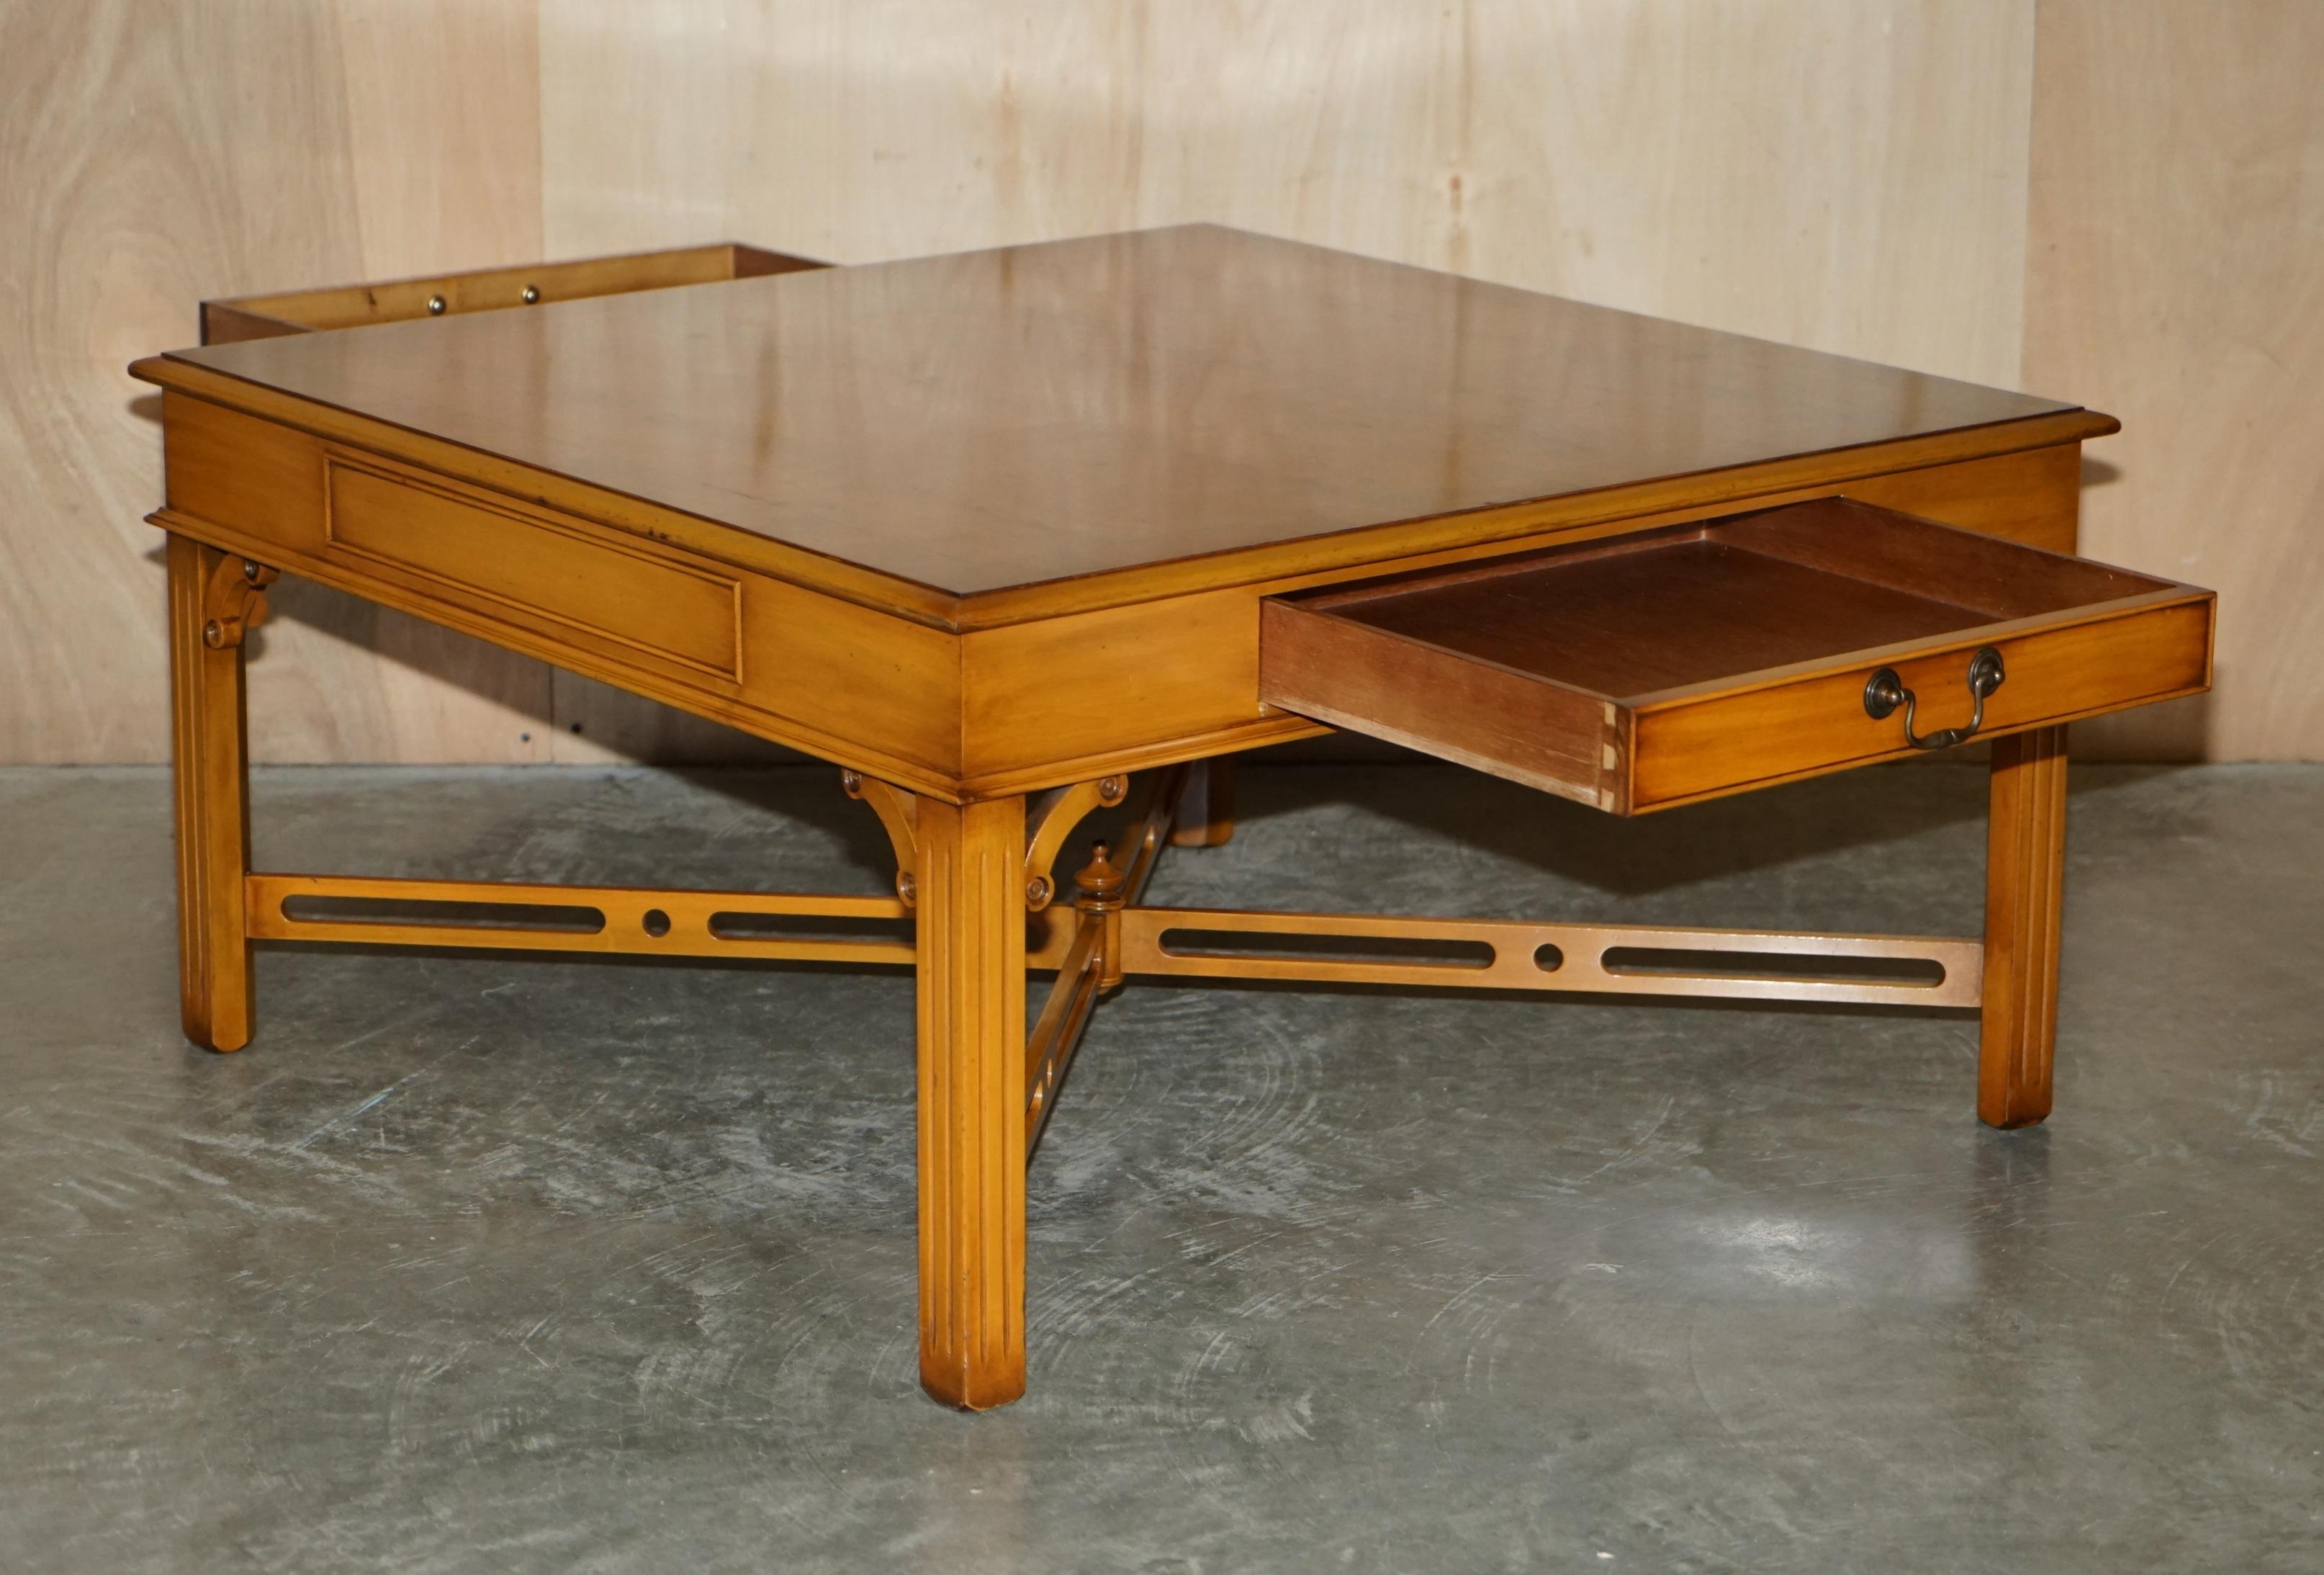 LOVELY BURR YEW WOOD TABLE COFFEE TABLE WiTH THOMAS CHIPPENDALE STRETCHES en vente 10